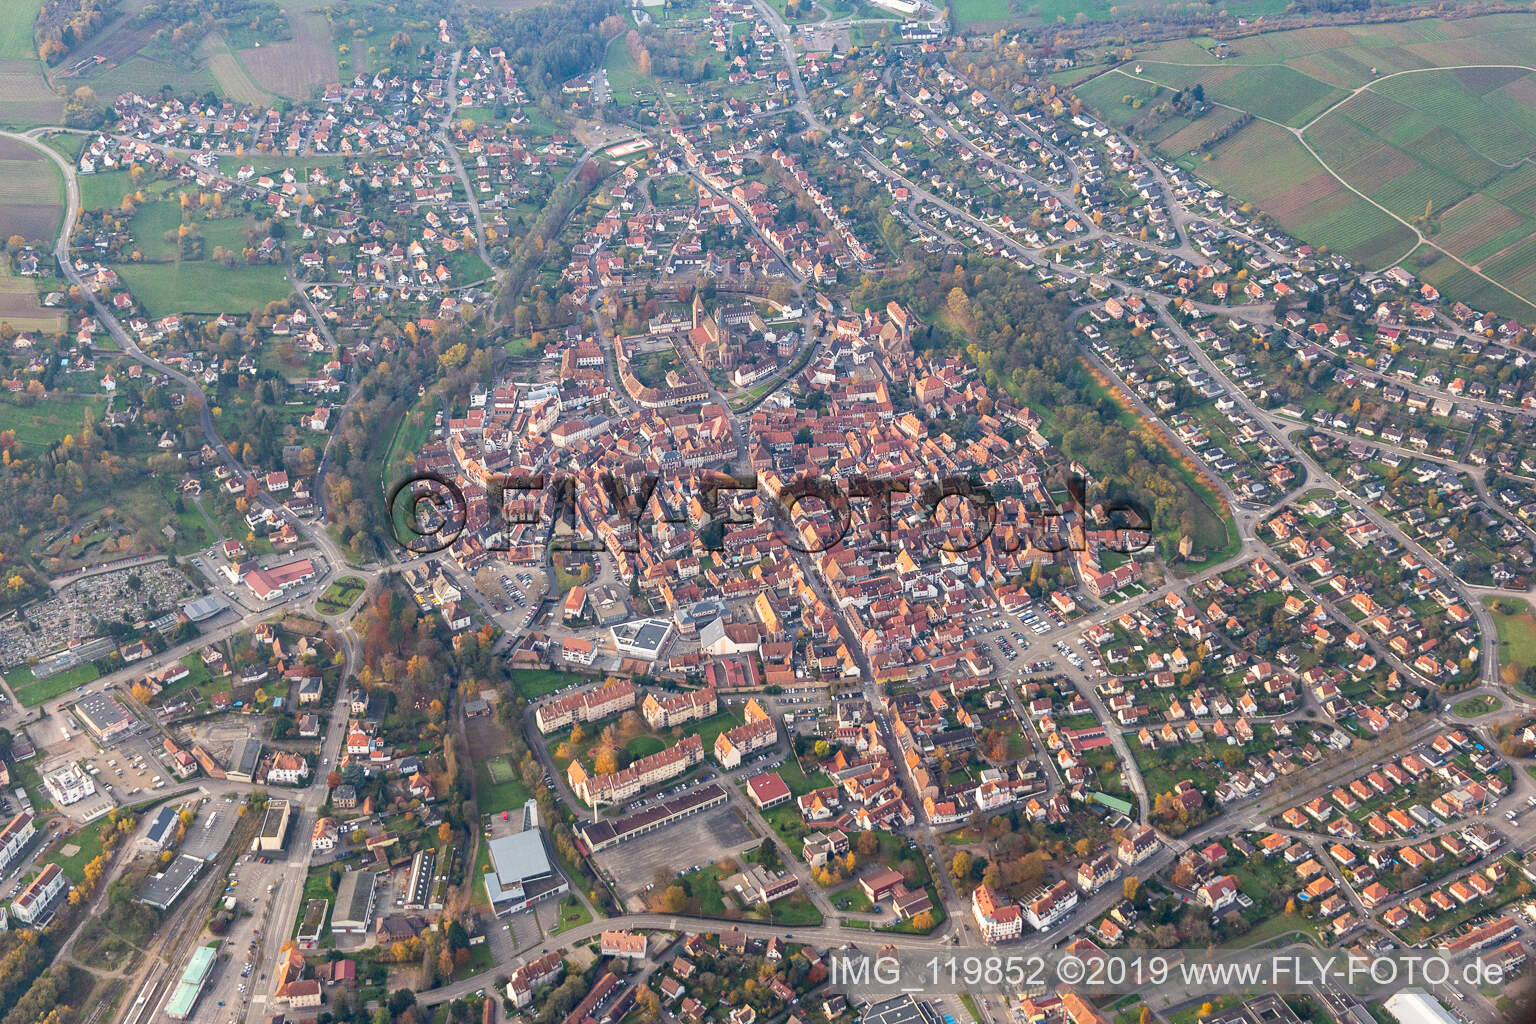 Drone image of Wissembourg in the state Bas-Rhin, France